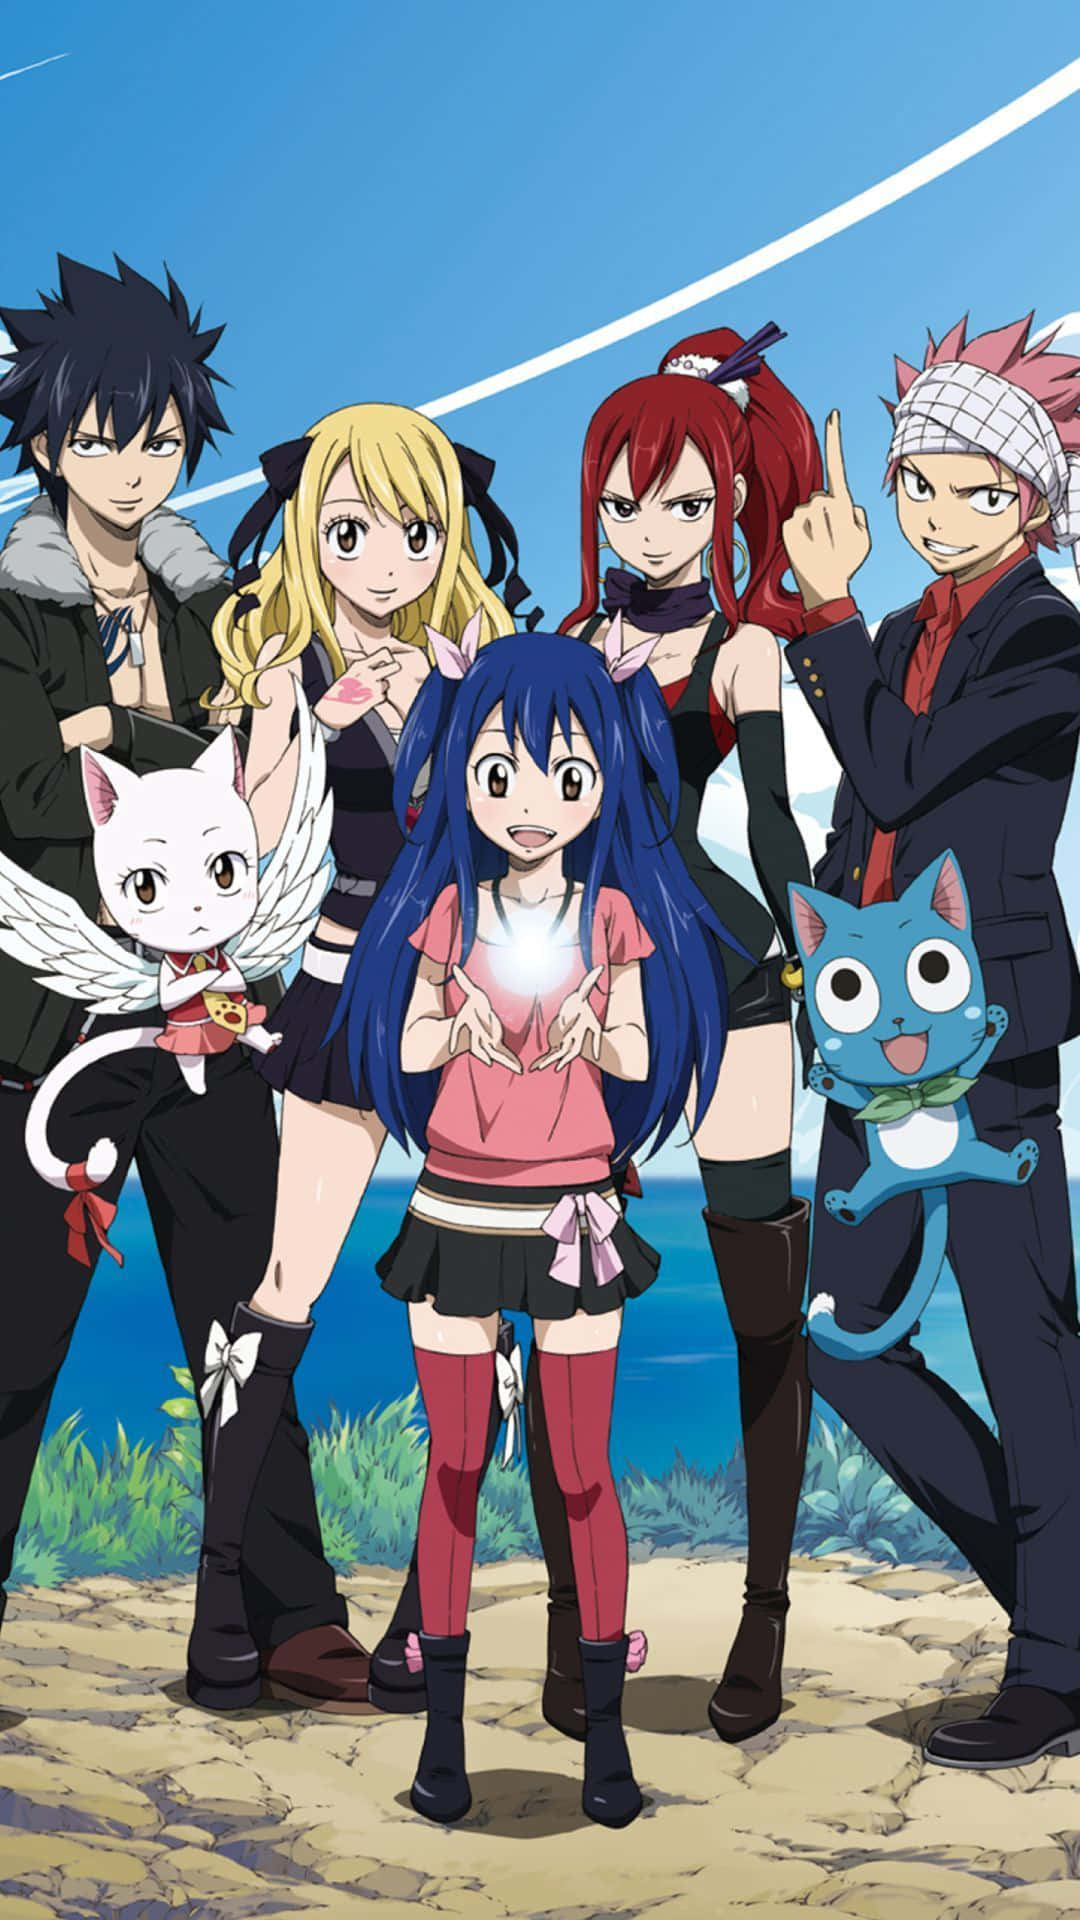 Free Fairy Tail Iphone Wallpaper Downloads, [100+] Fairy Tail Iphone  Wallpapers for FREE 